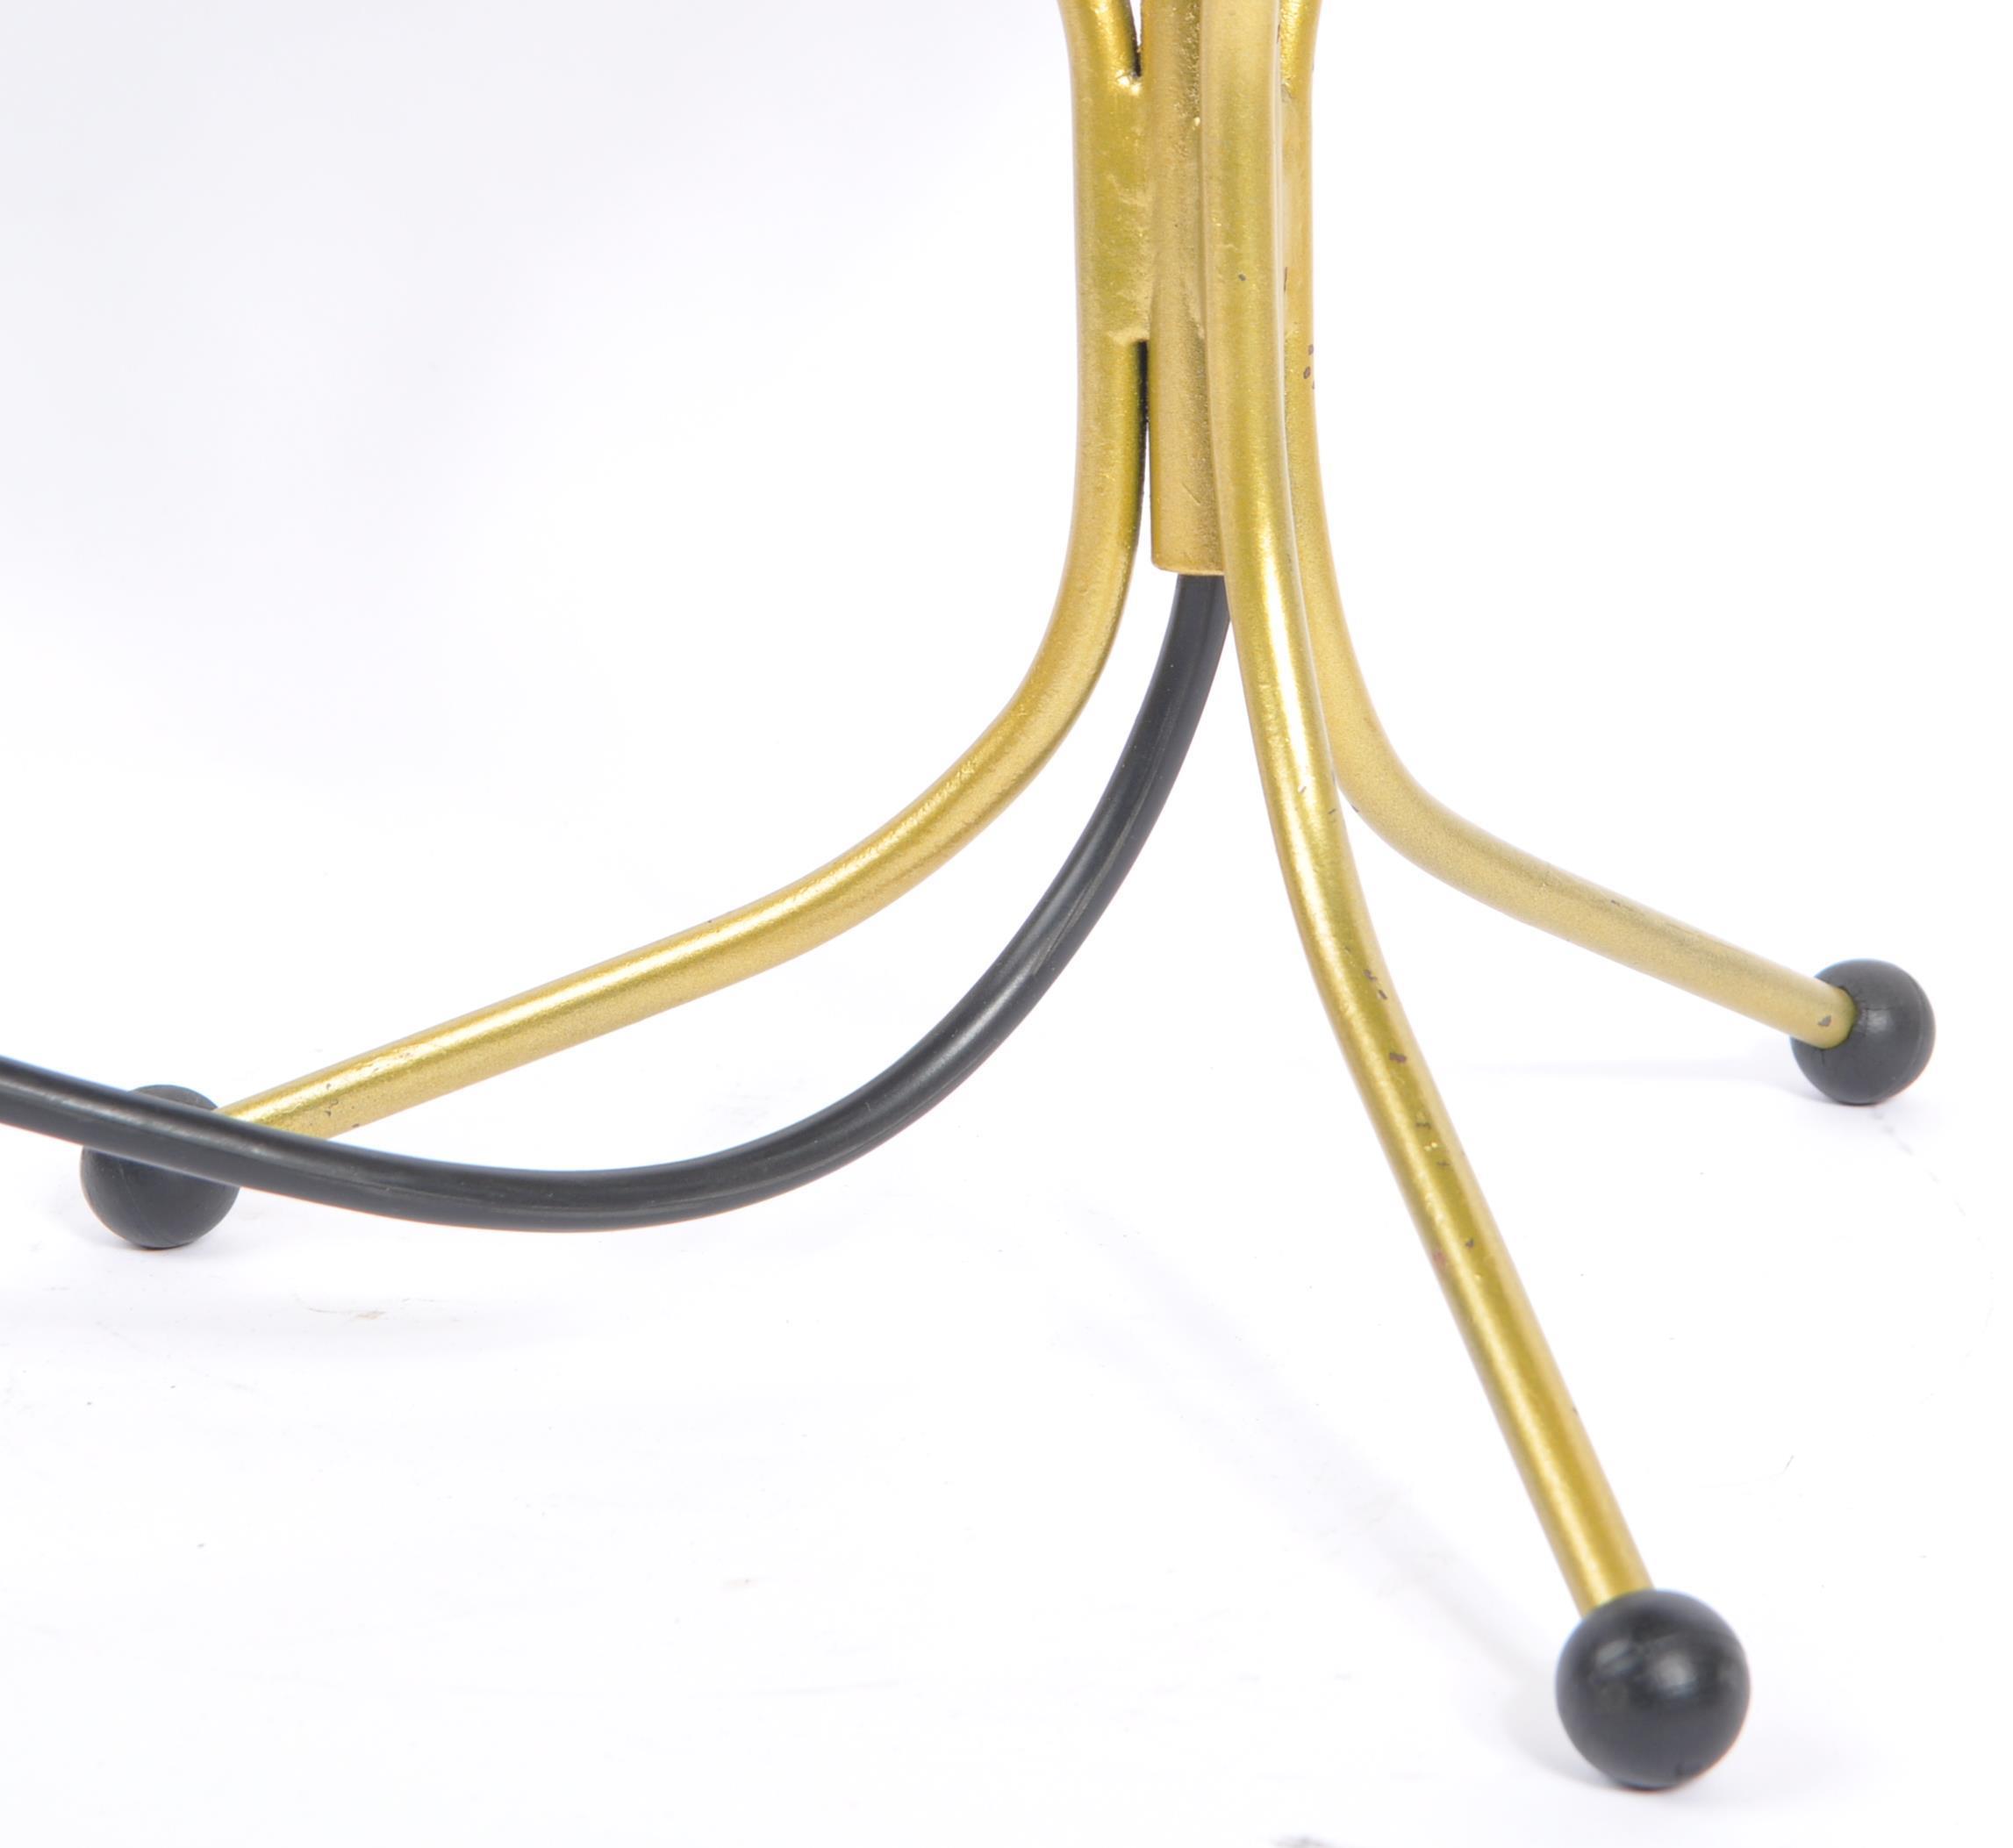 LATER 20TH CENTURY BRASS TRIPOD TABLE LAMP - Image 5 of 5